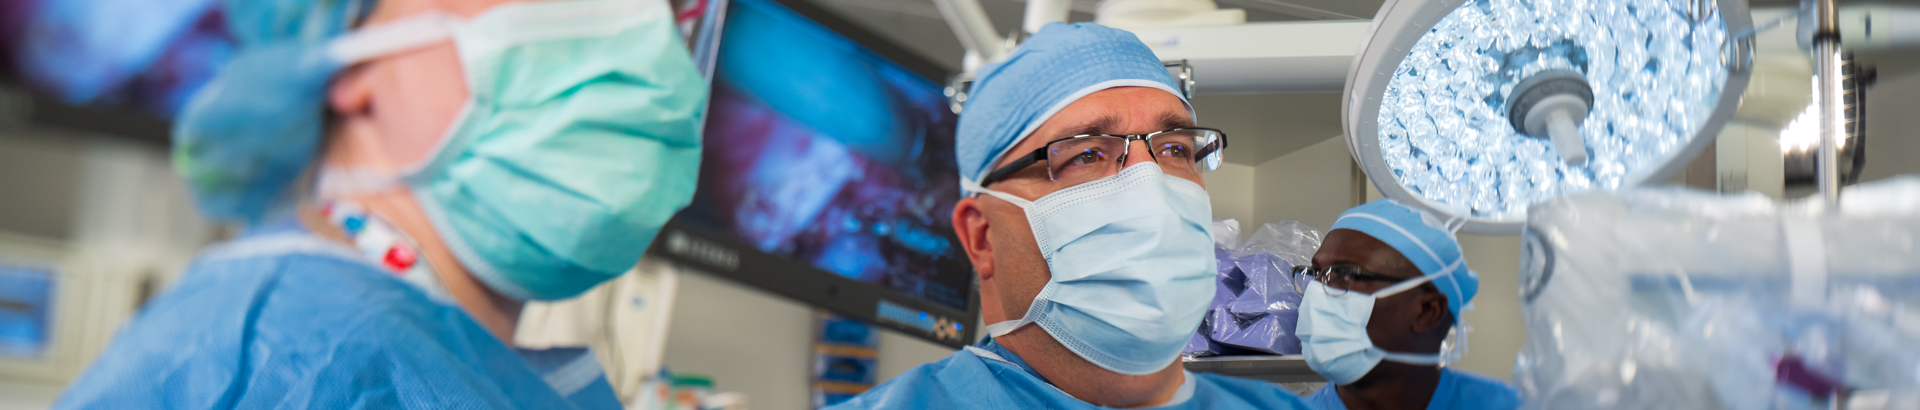 Explore the minimally invasive and robotic surgerical procedures at Bayhealth.